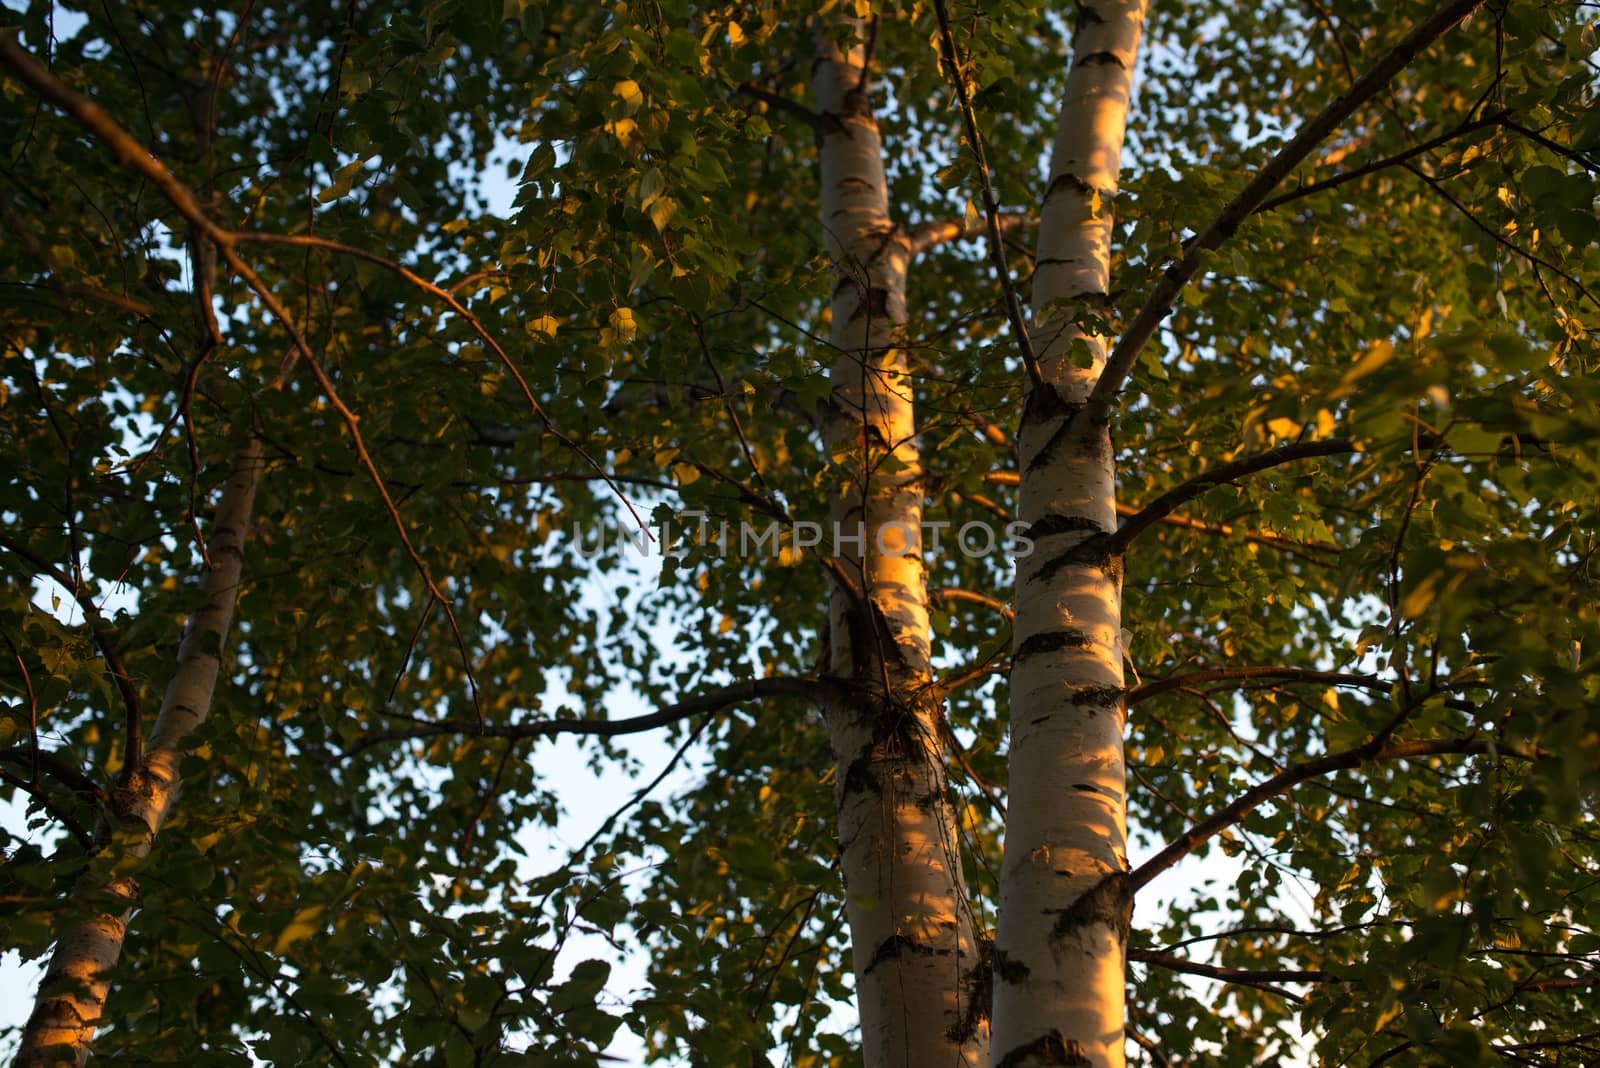 Birch branches and trunk with leafs look up. Summer scene